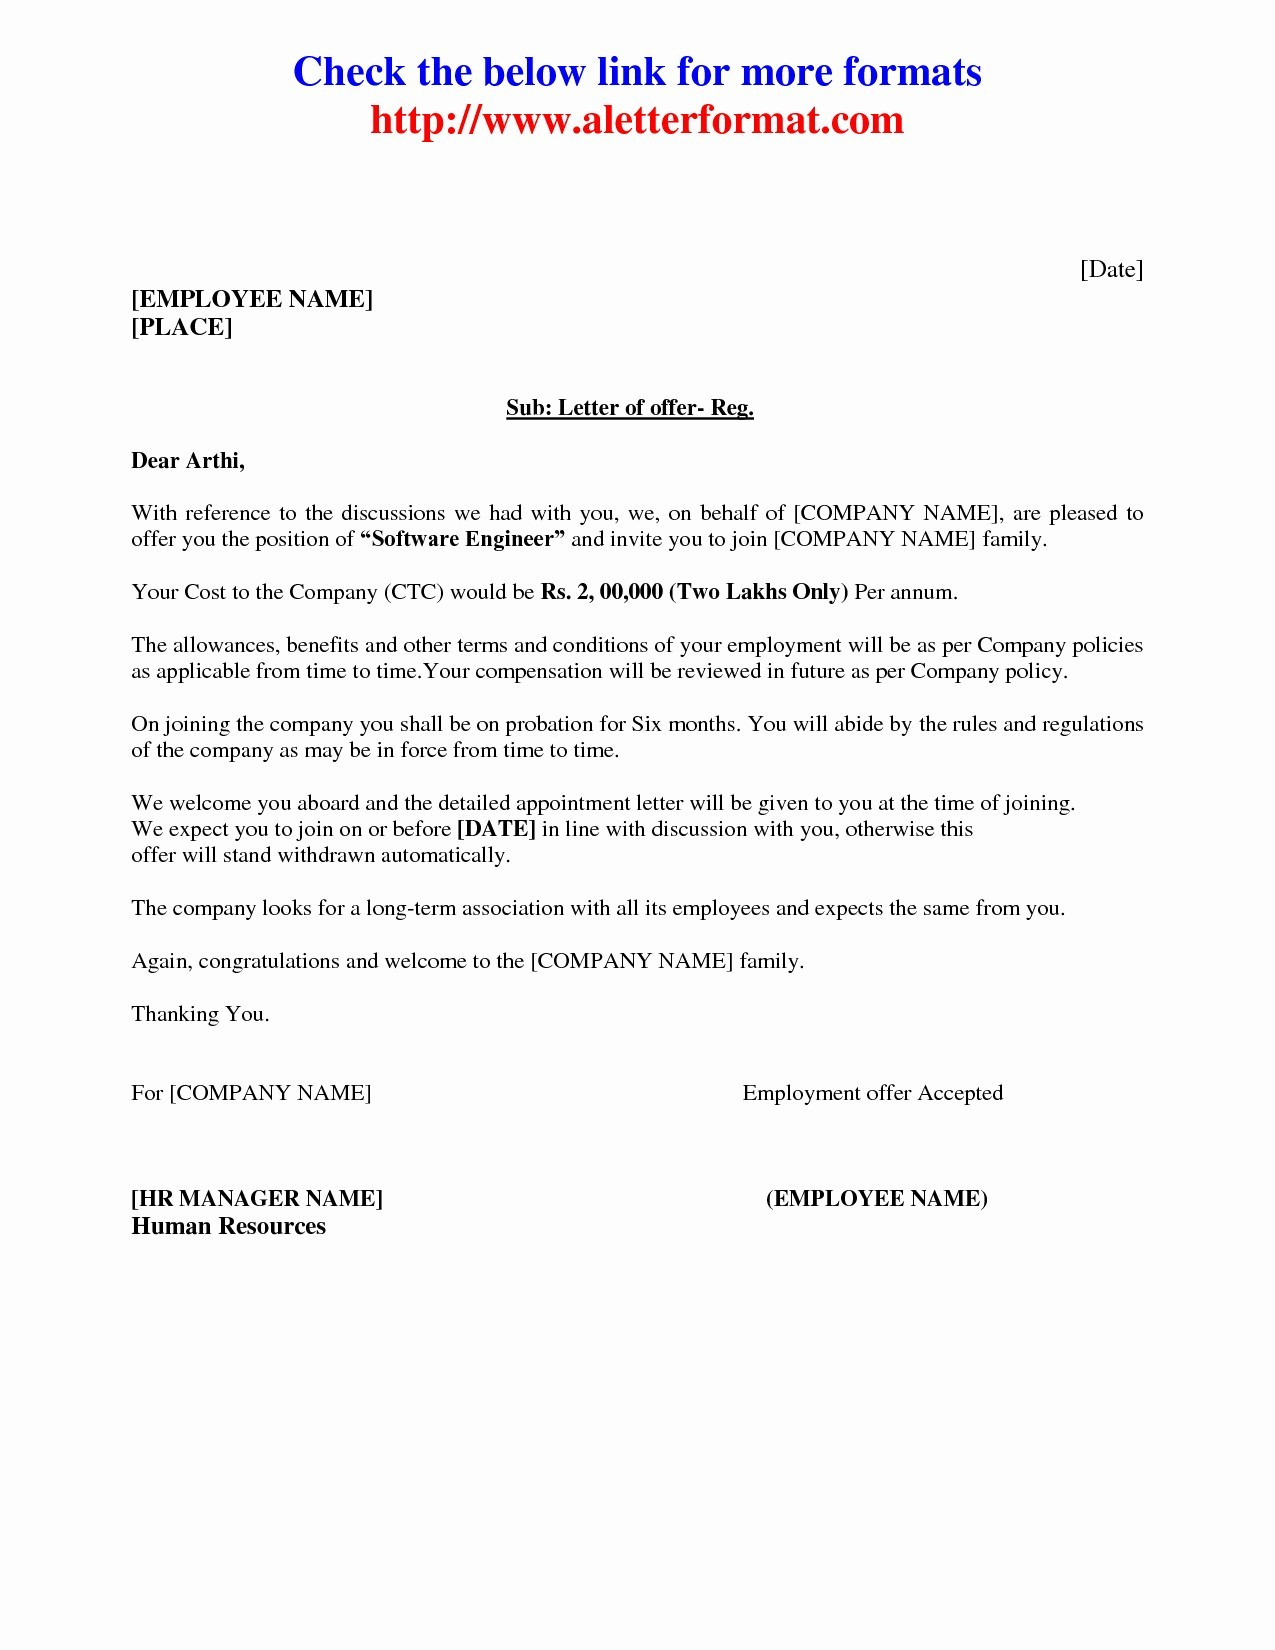 Job Offer Letter Template Free Download - Appointment Letter Sample In Word format India Copy Appointment